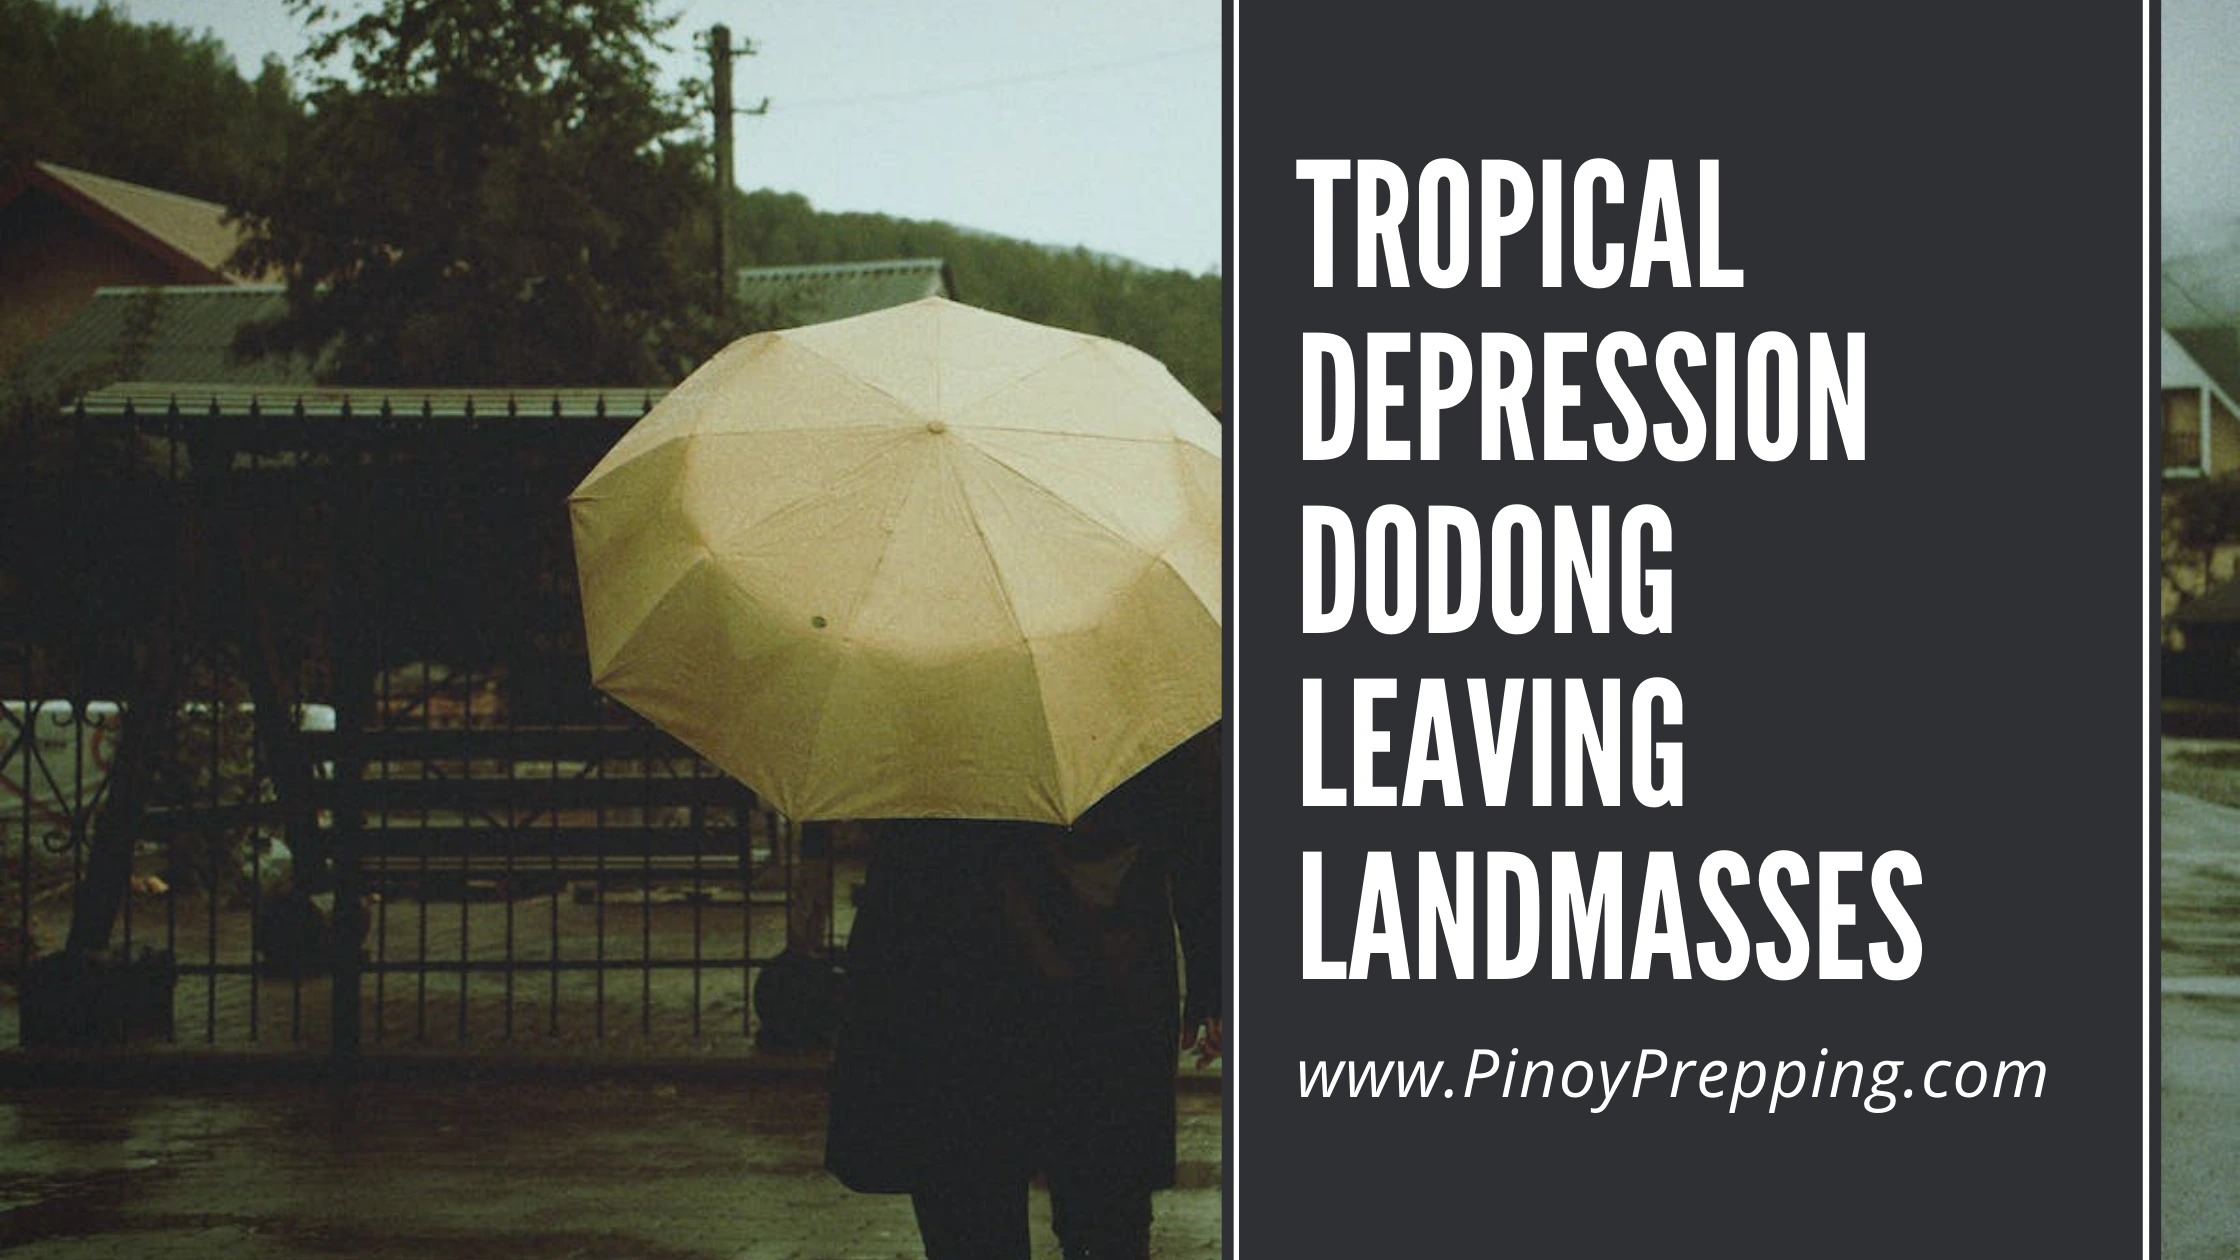 Tropical Depression Dodong over West Philippine Sea, Moving Away from Landmass